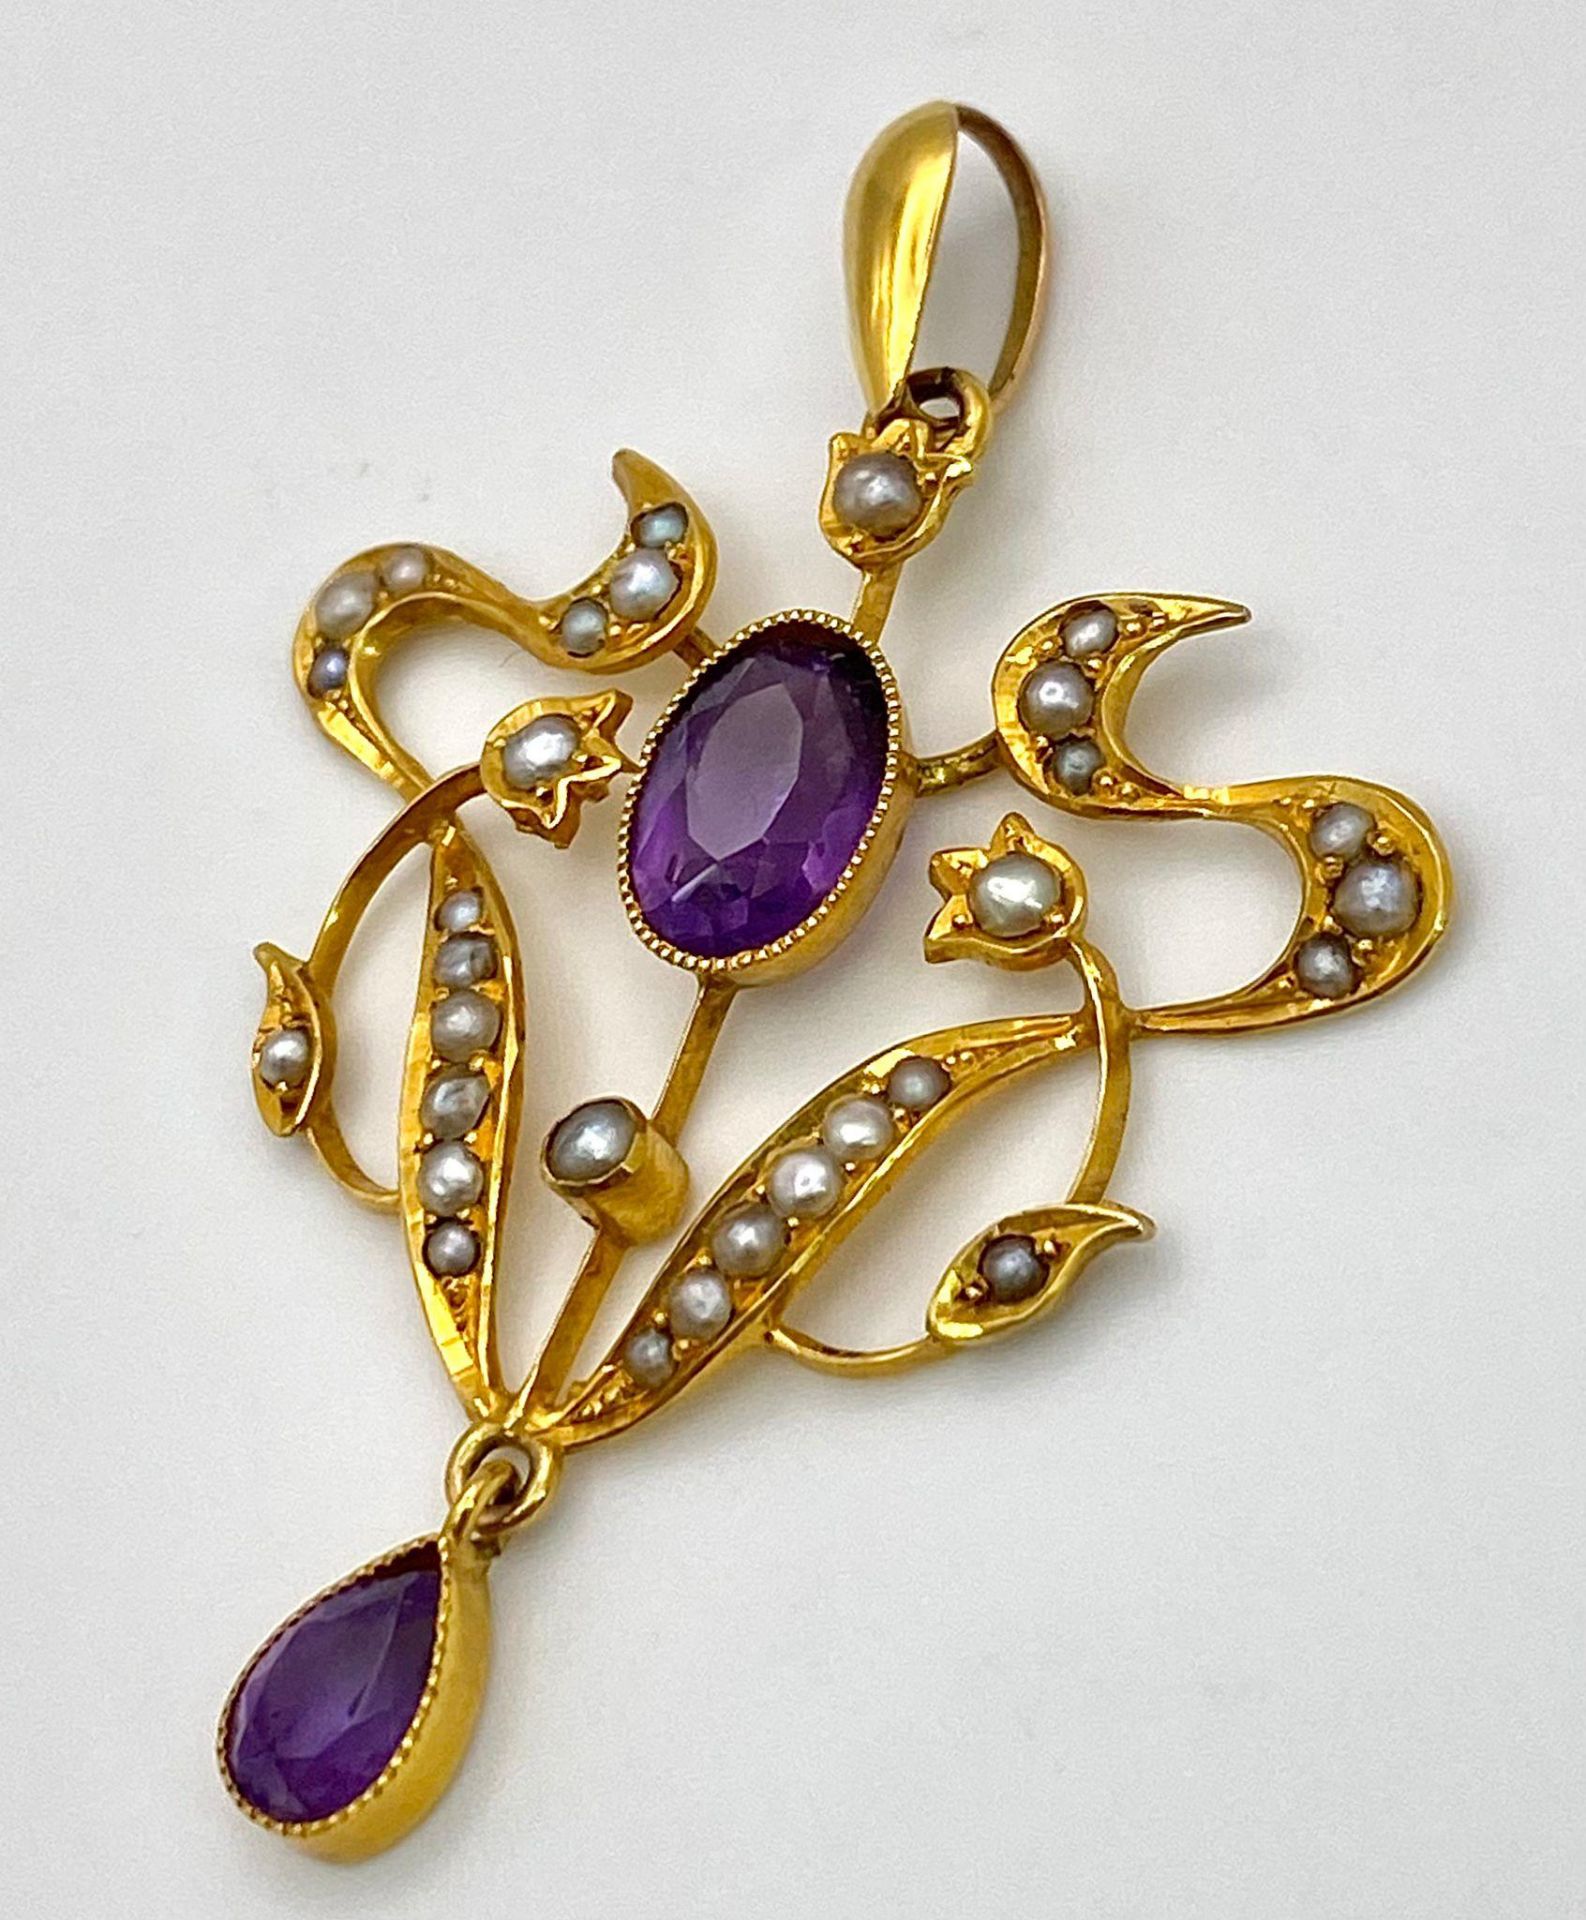 A beautiful ART NOUVEAU 9 K yellow gold pendant with vivid coloured amethysts and natural seed